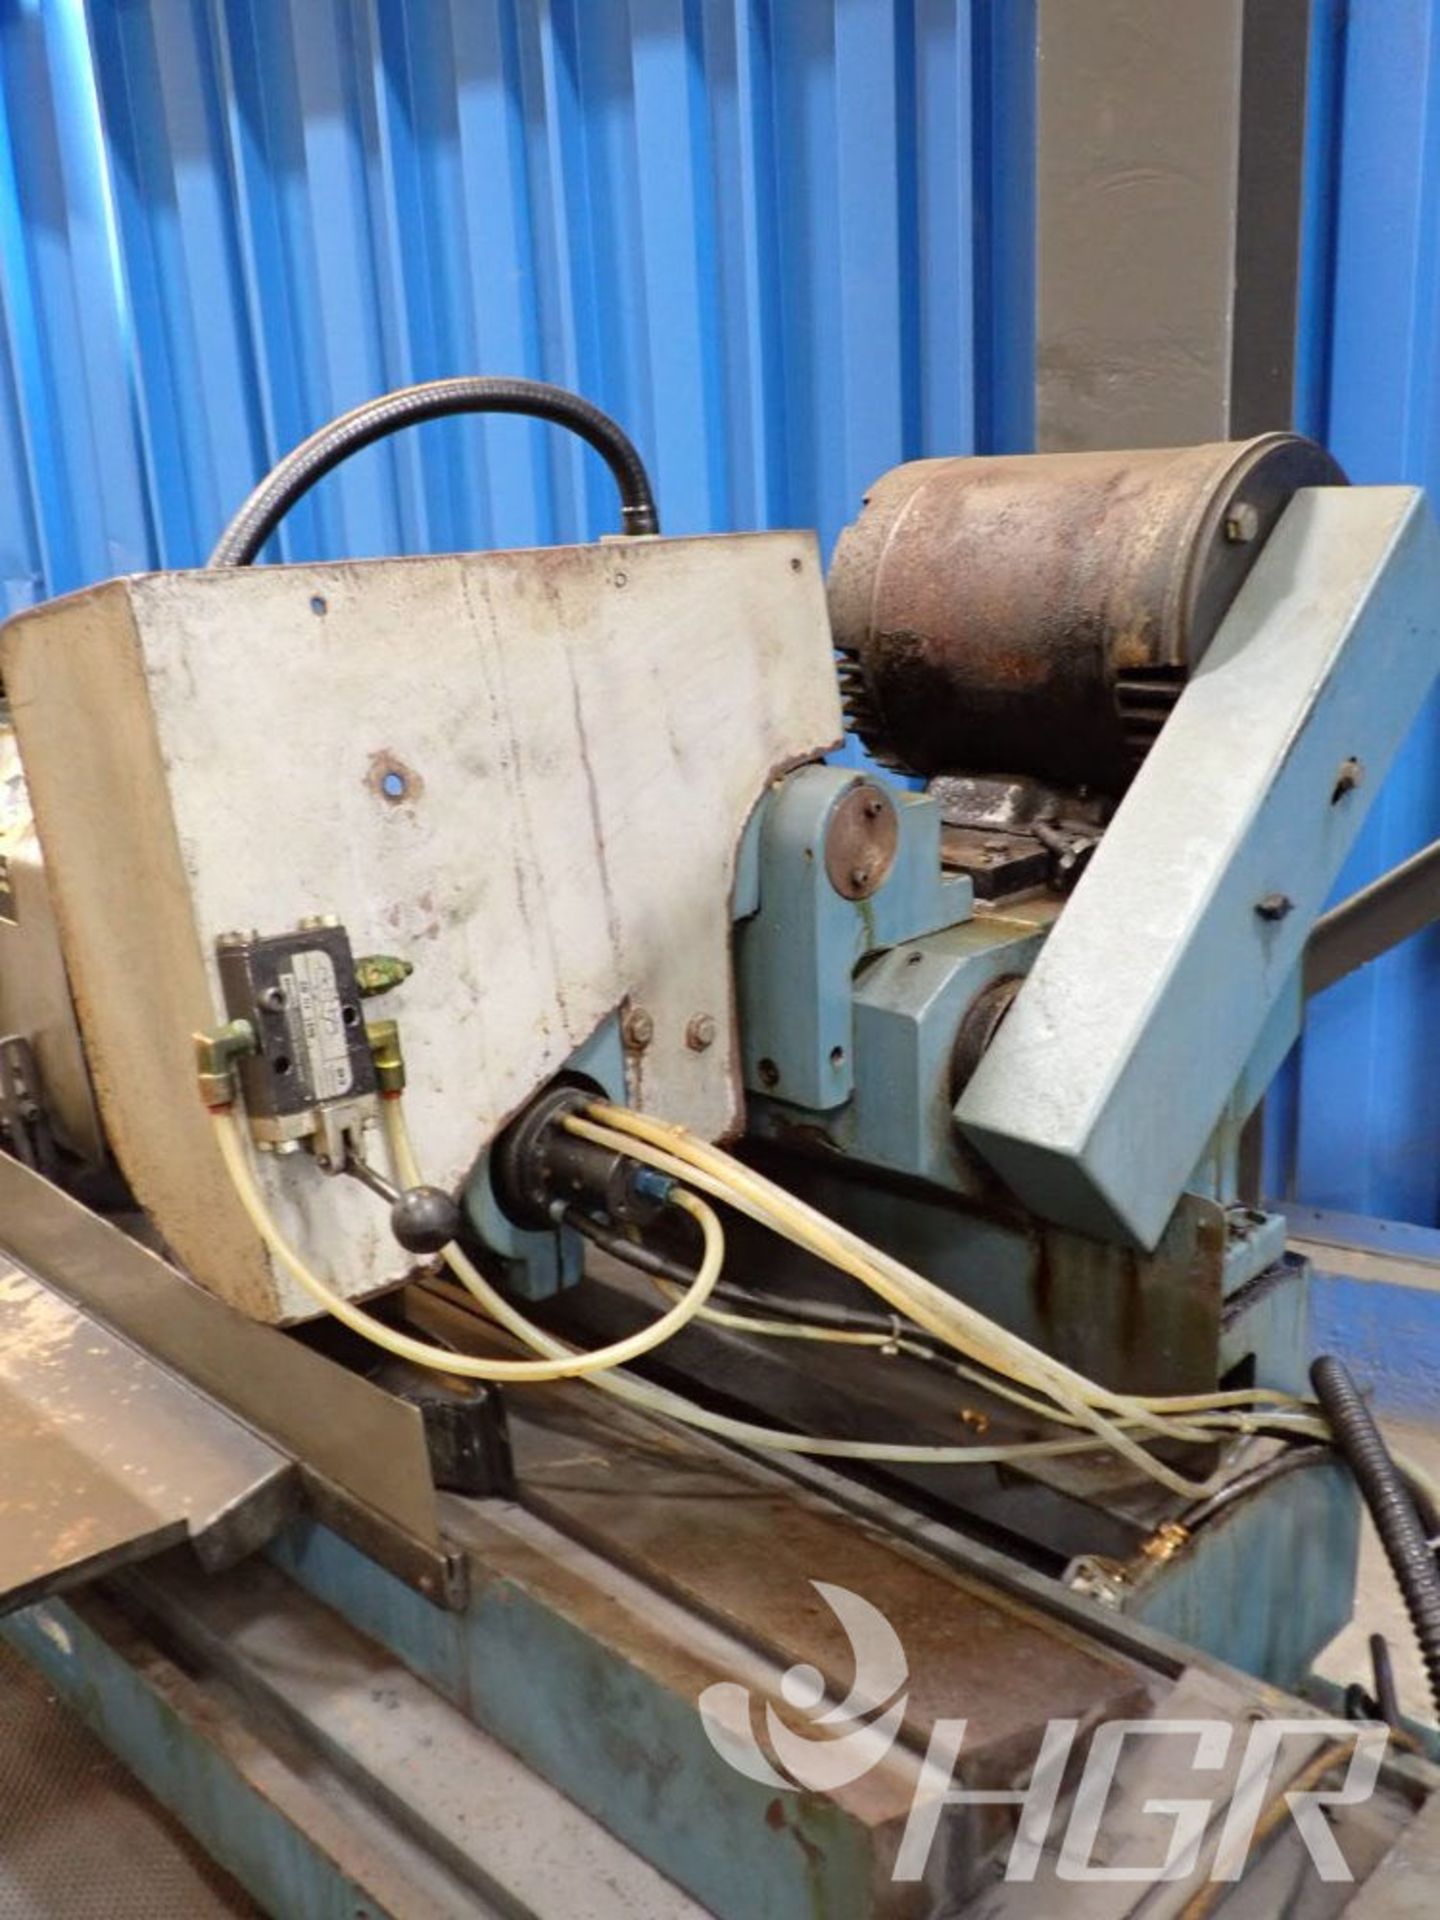 K.O LEE CYLINDRICAL GRINDER, Model C1020L2, Date: n/a; s/n 27475, Approx. Capacity: 5HP , Power: 3/ - Image 6 of 21